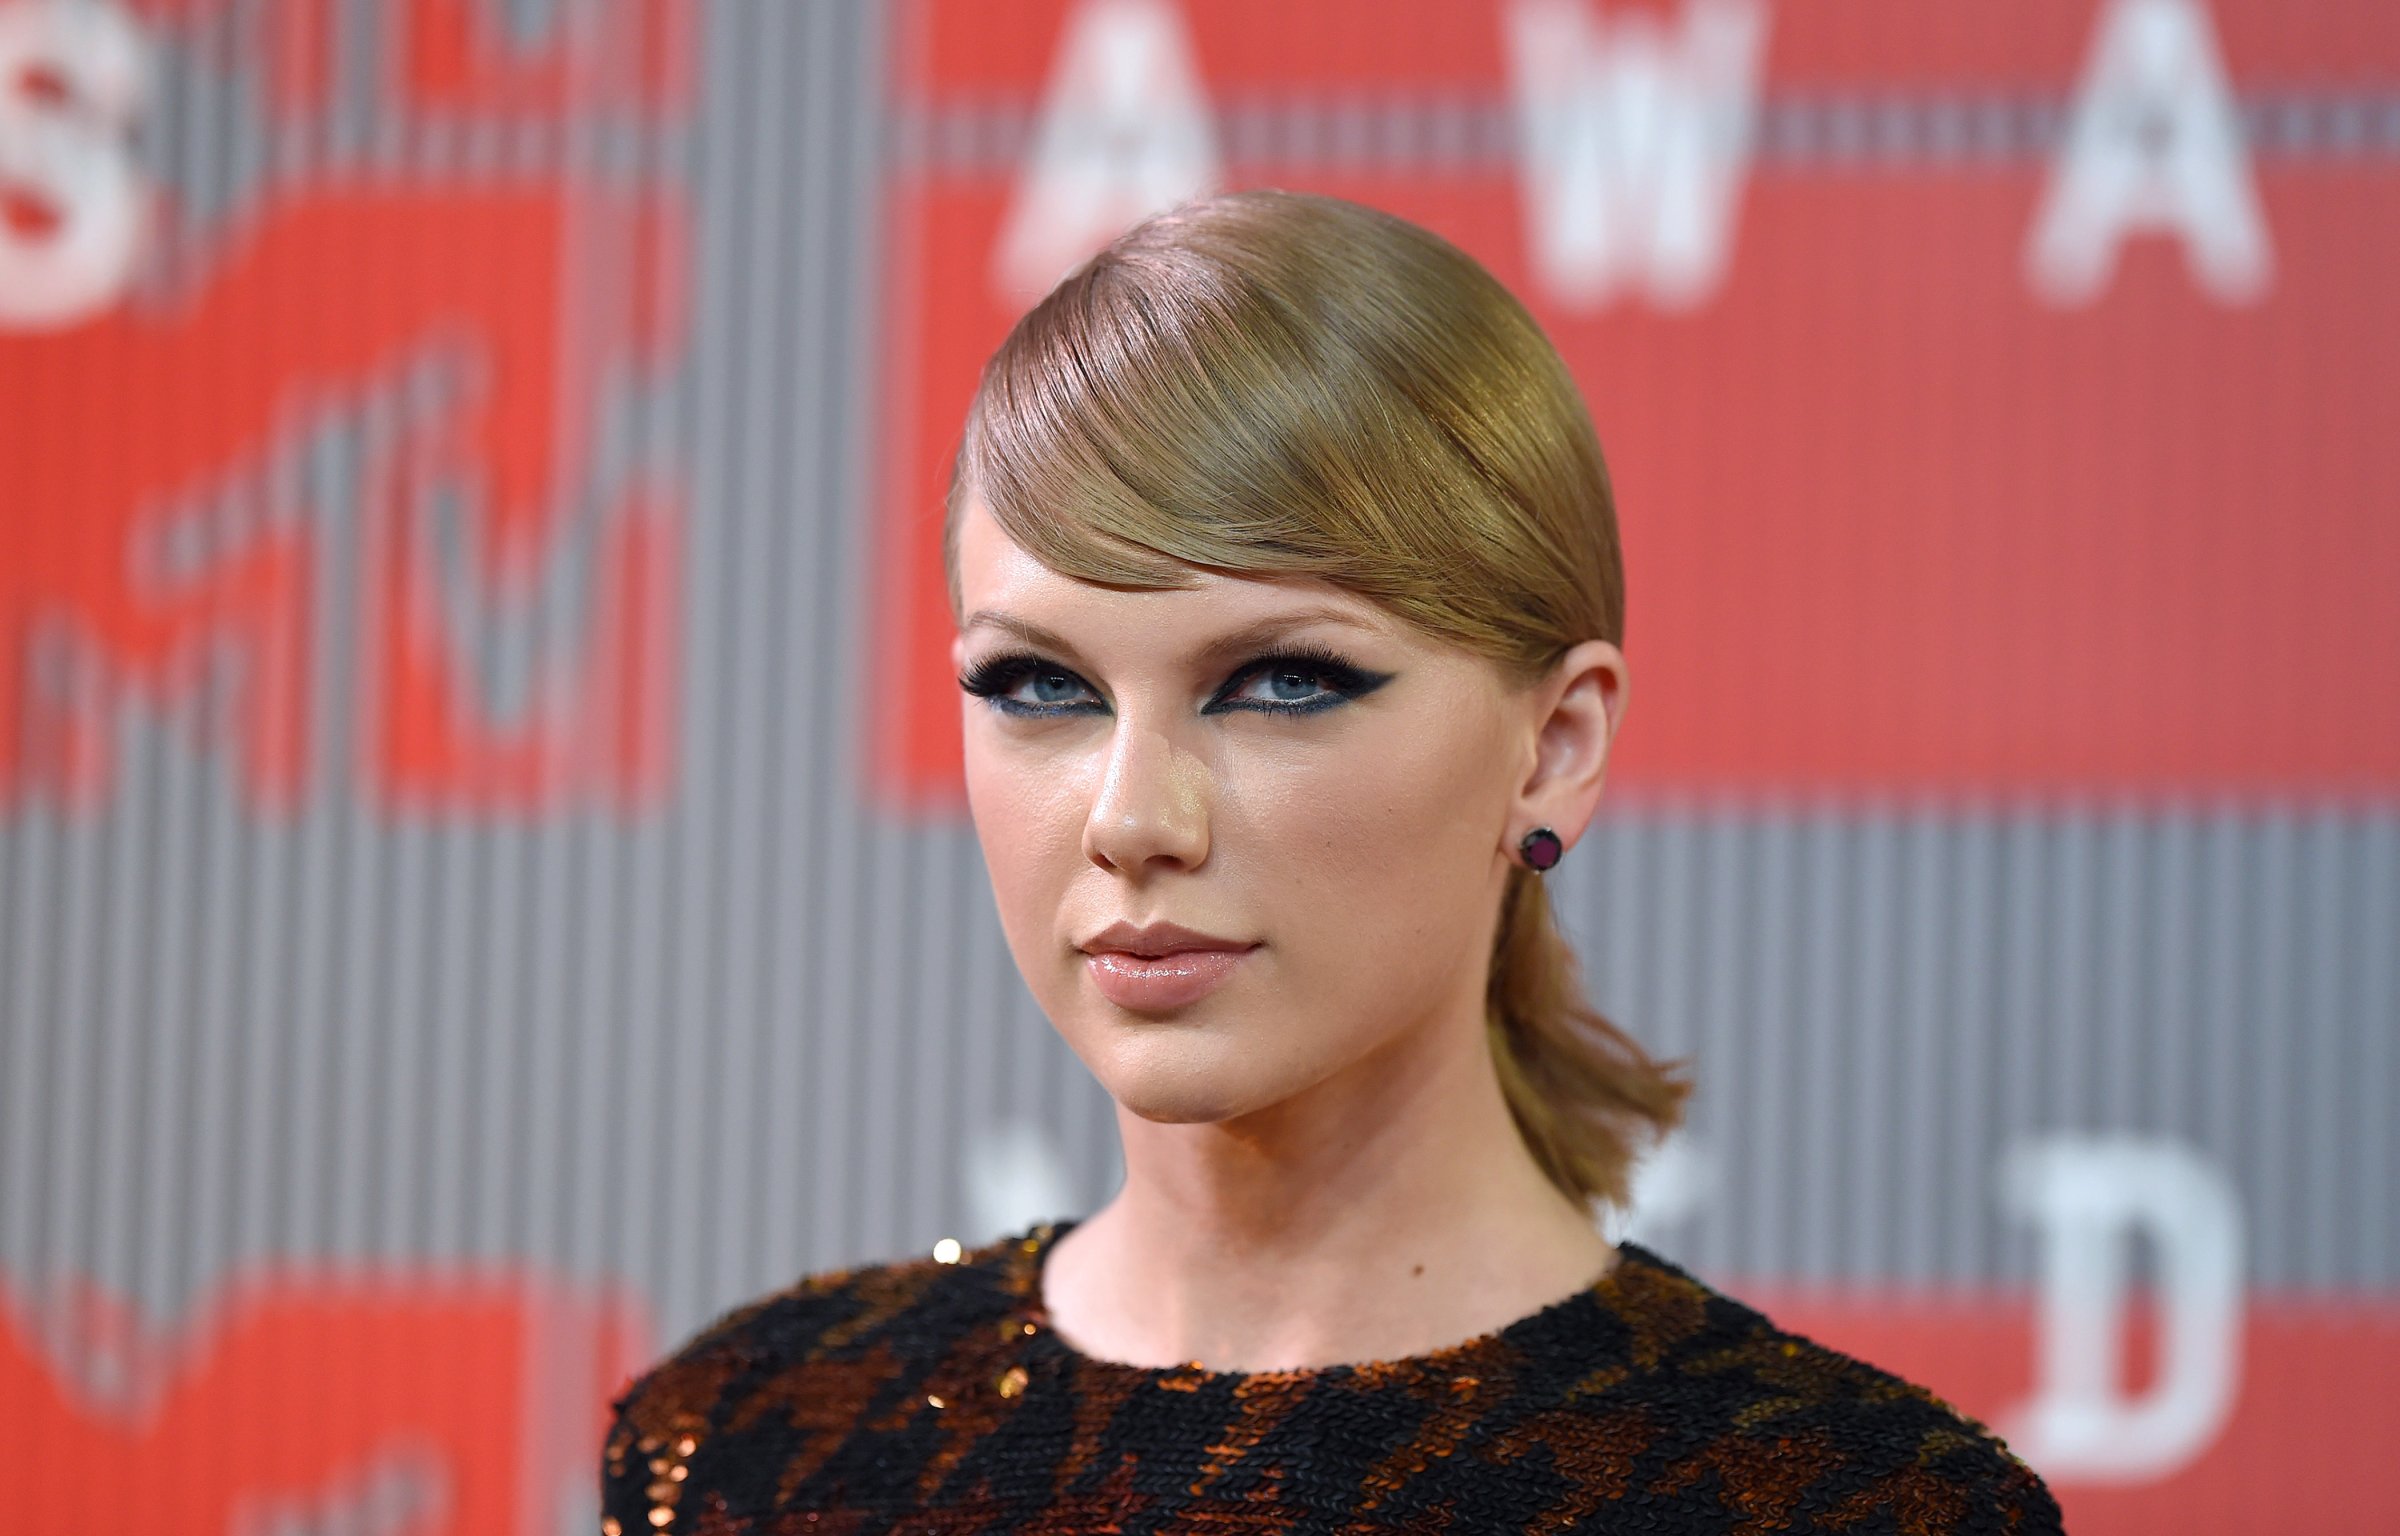 Taylor Swift at the 2015 MTV Video Music Awards in Los Angeles on Aug. 30, 2015.